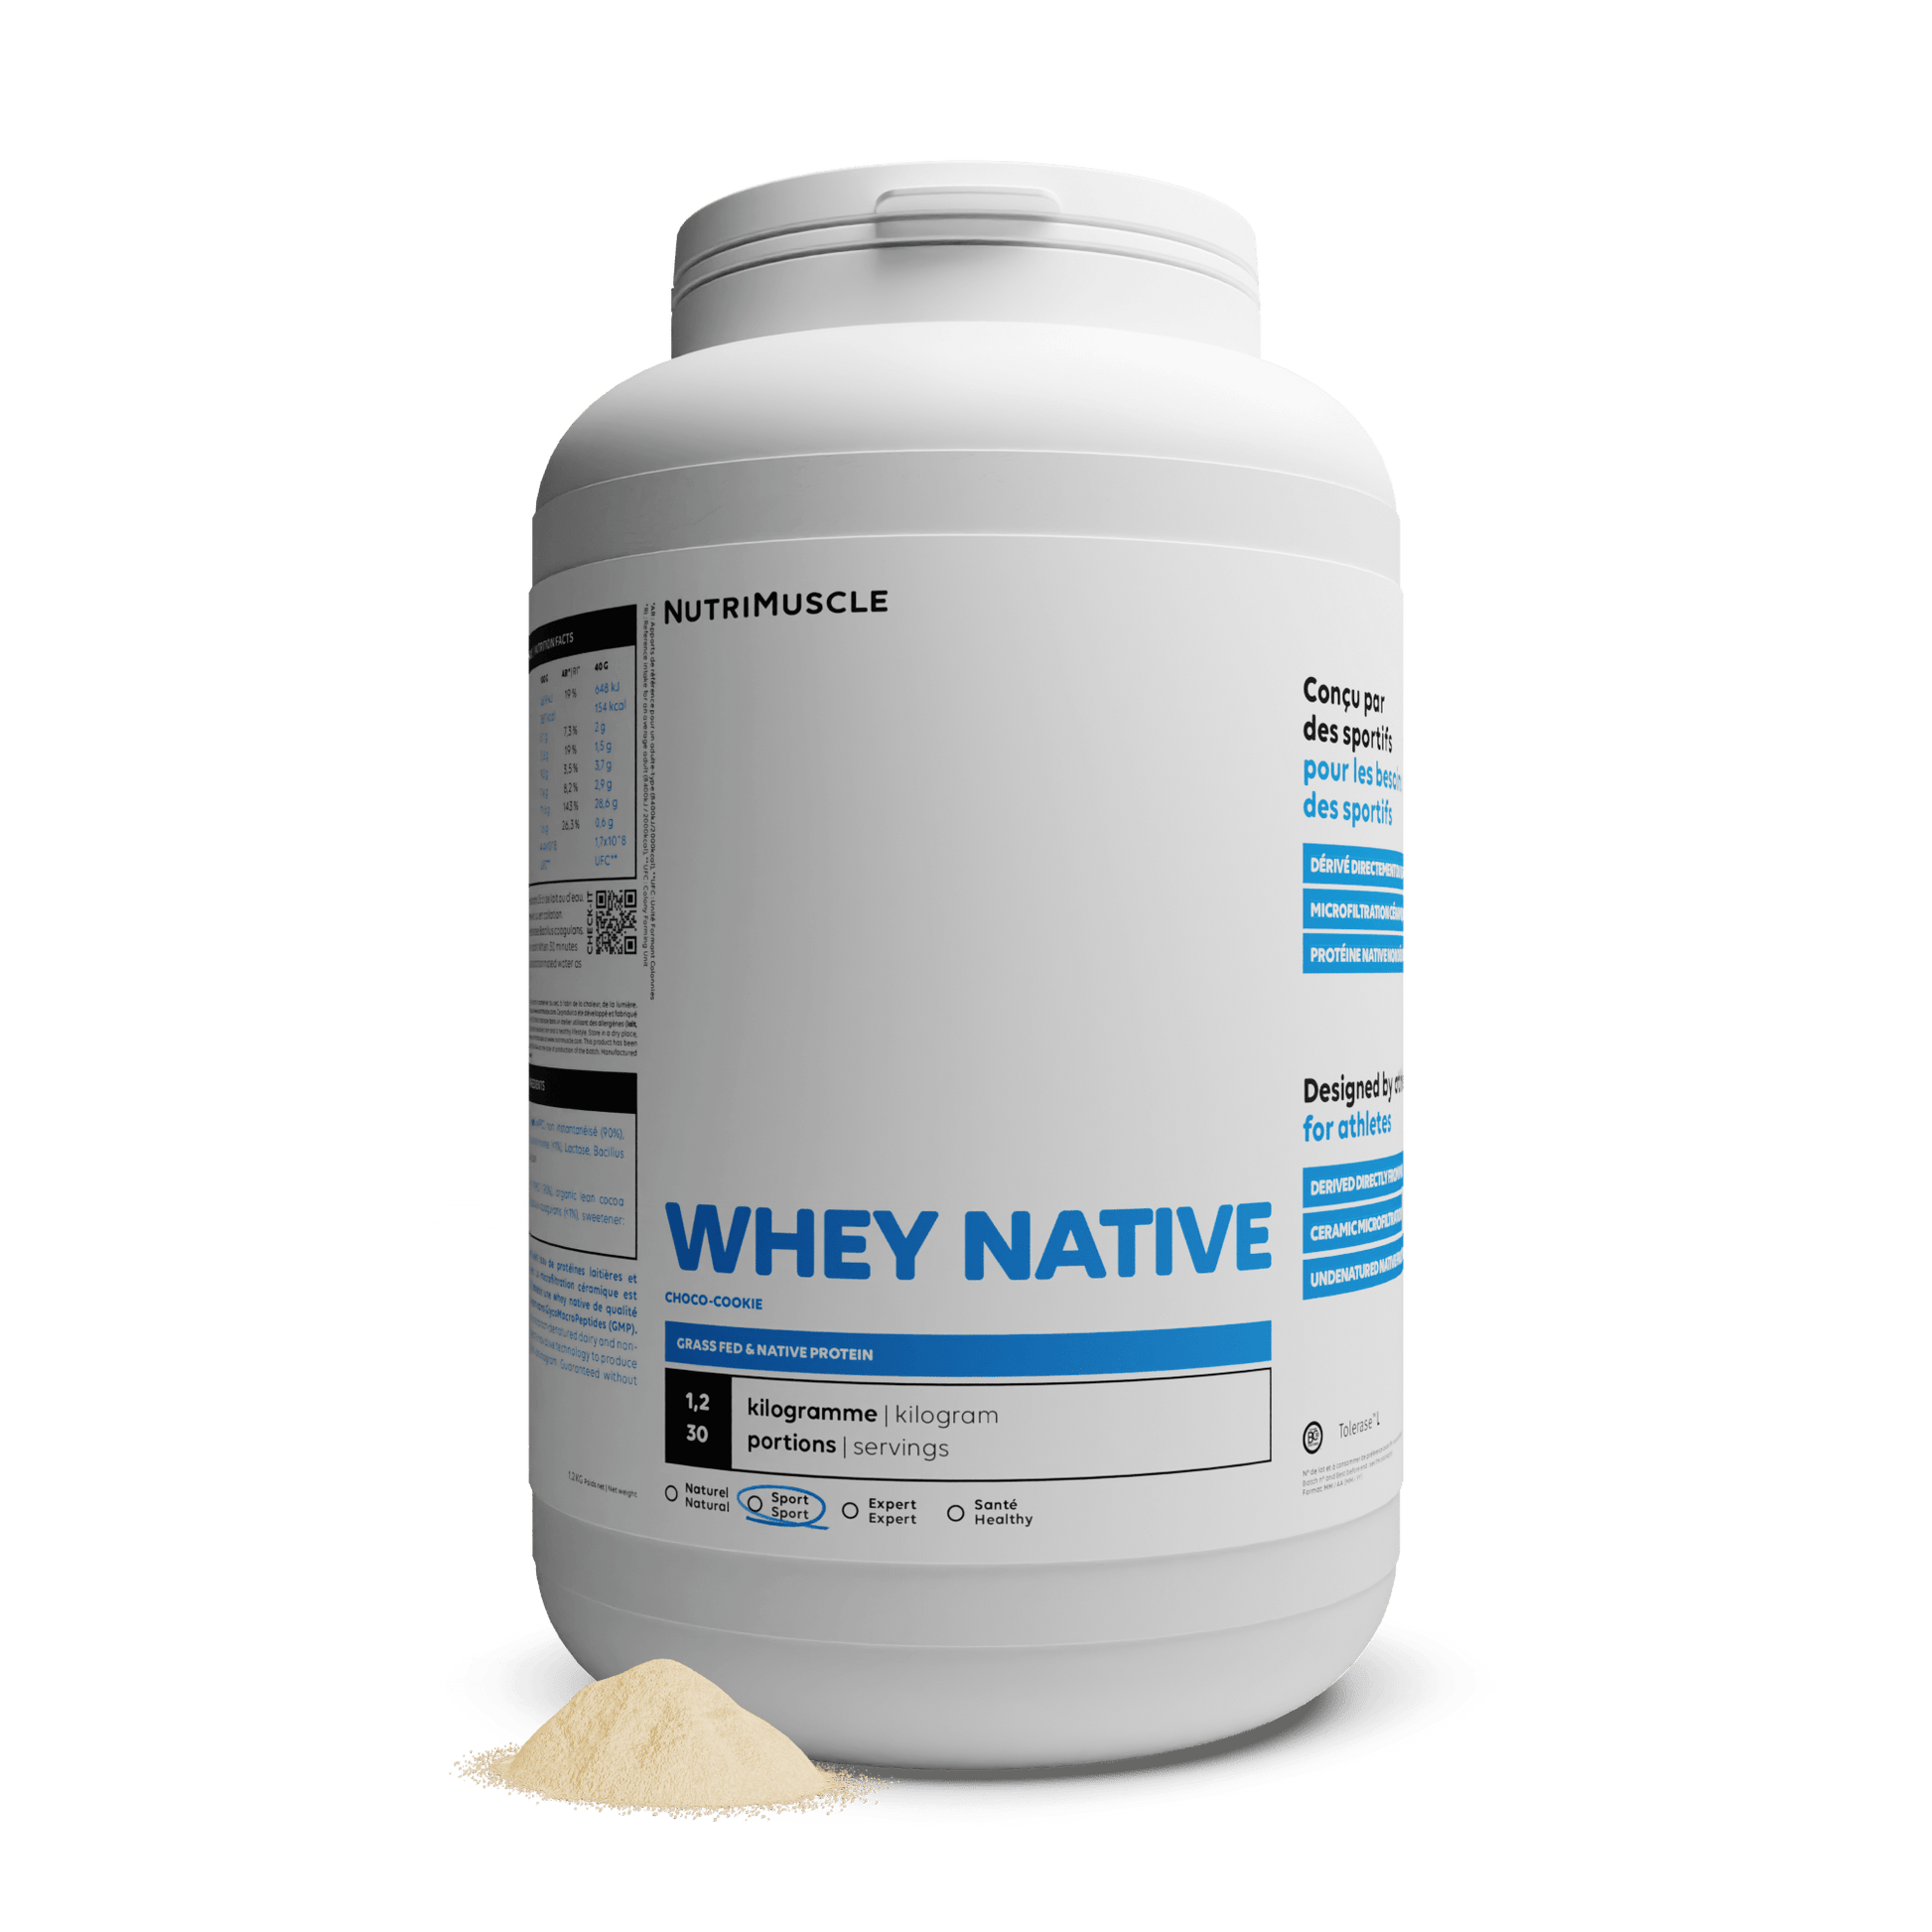 Nutrimuscle Protéines Choco cookie / 1.20 kg Whey Native